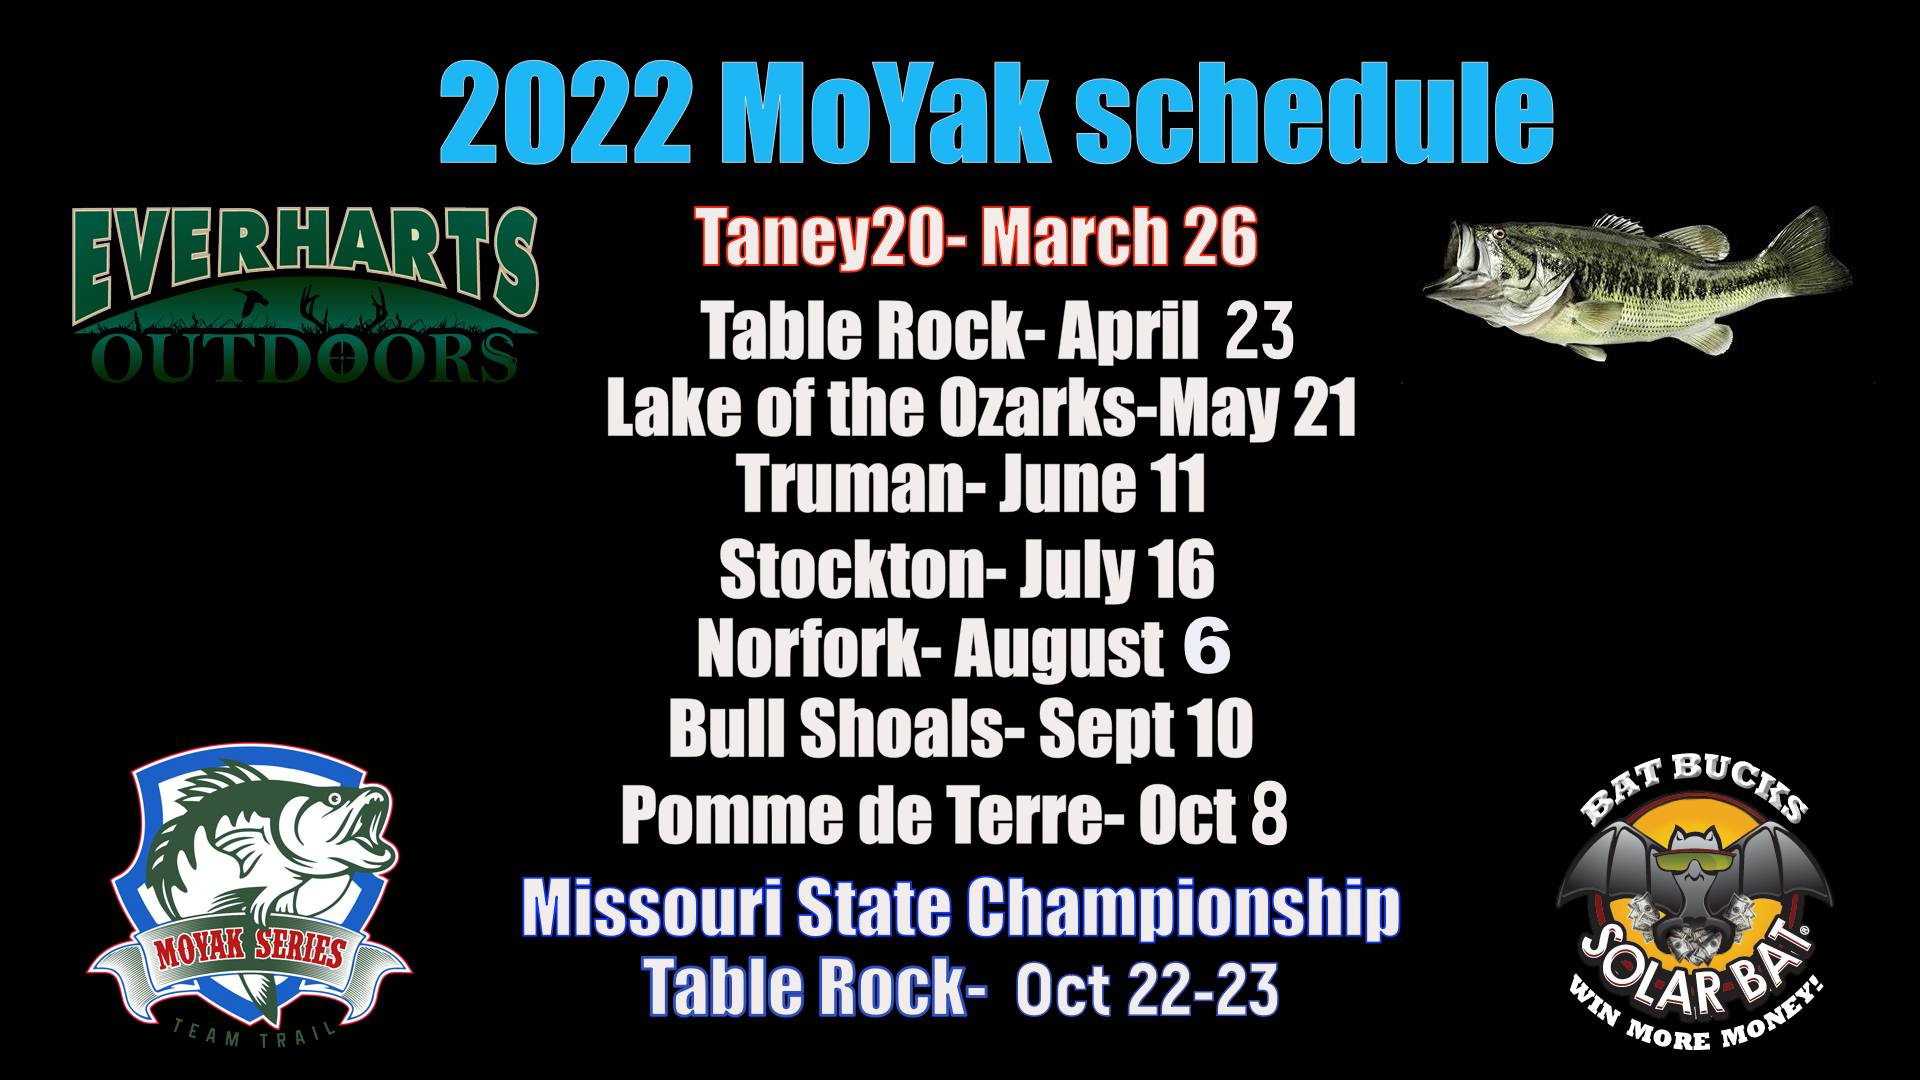 The 2022 schedule for MFTS